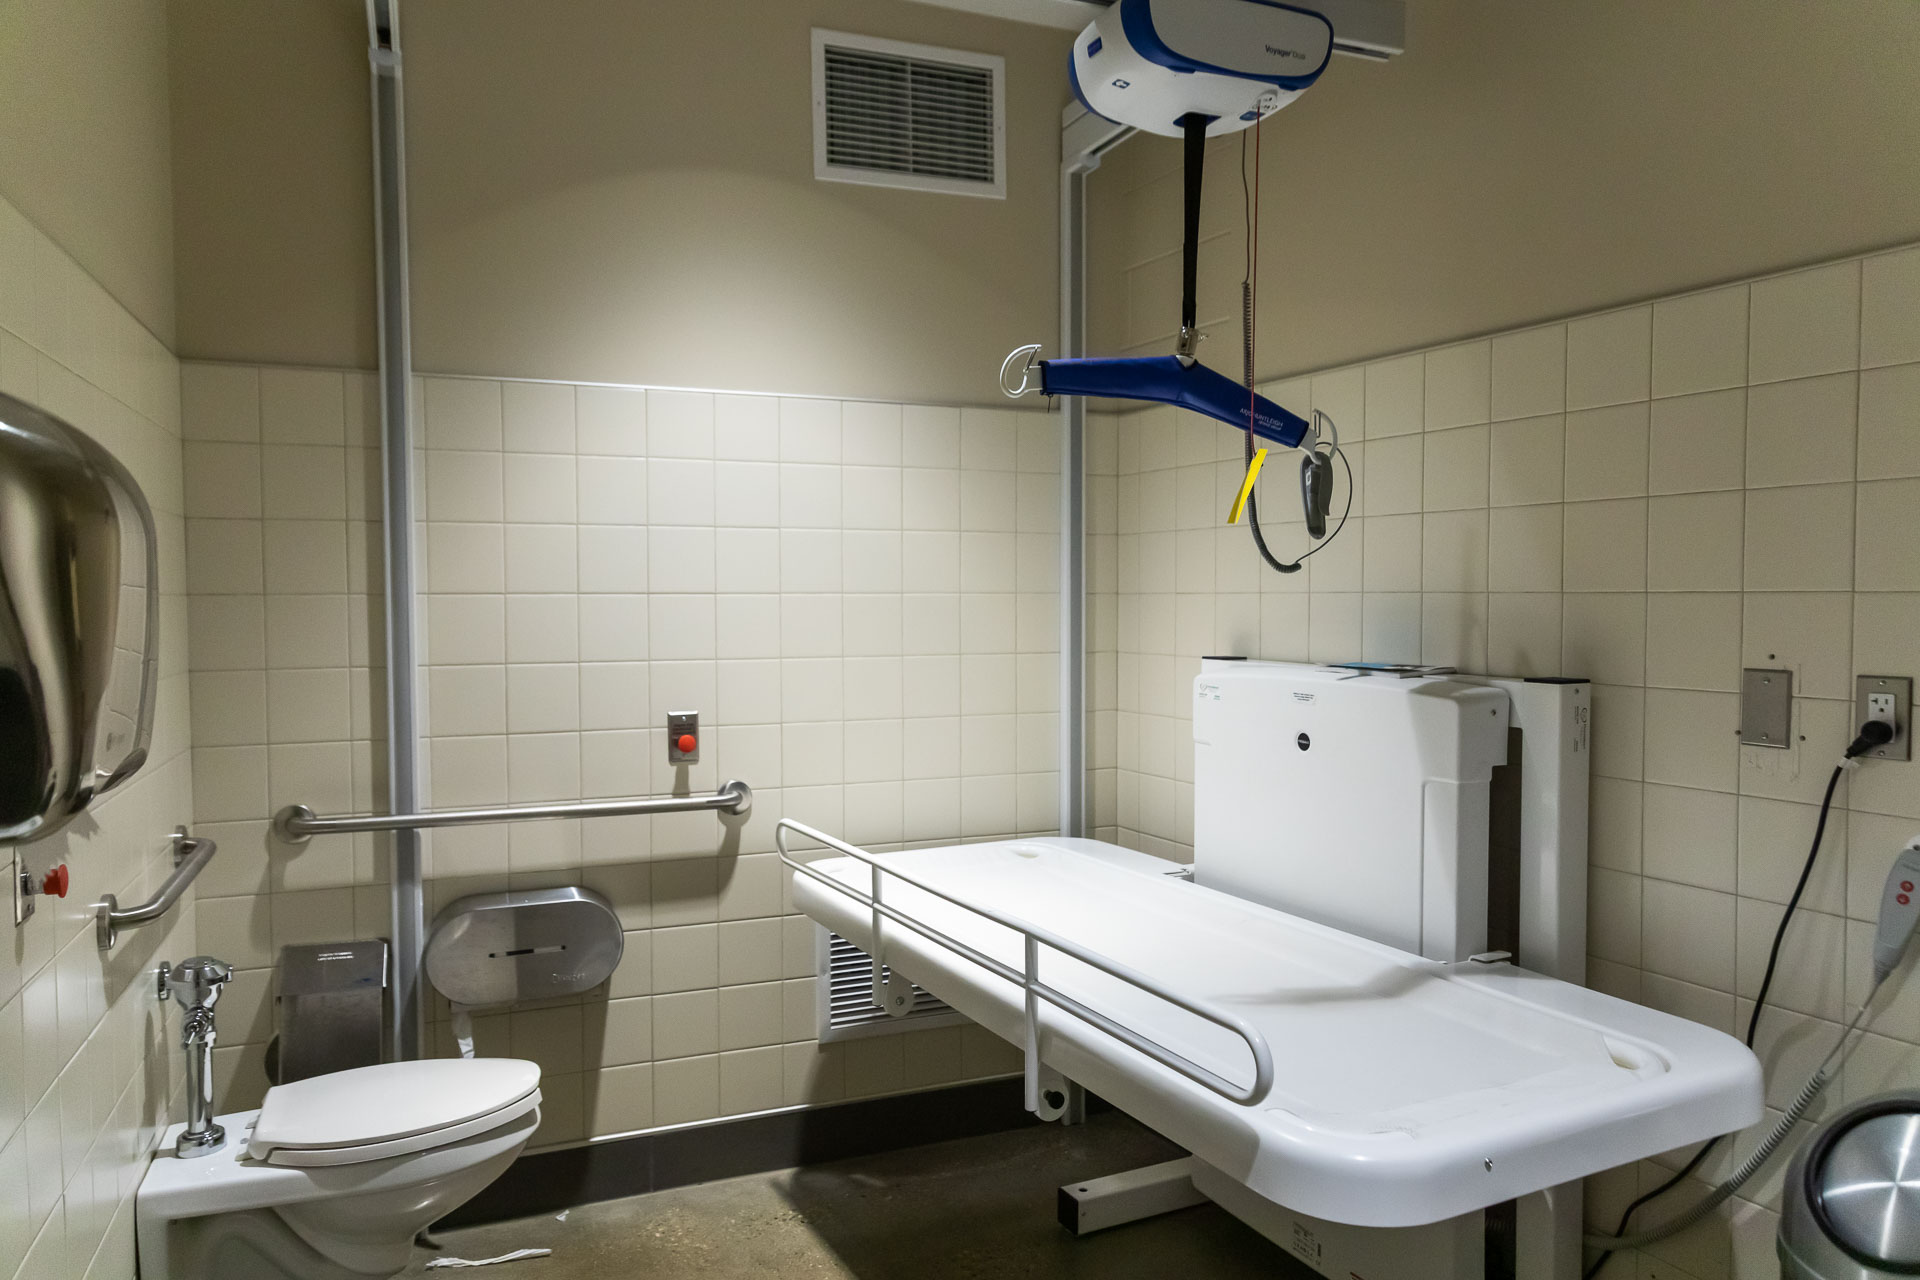 Accessible washroom with adult change table